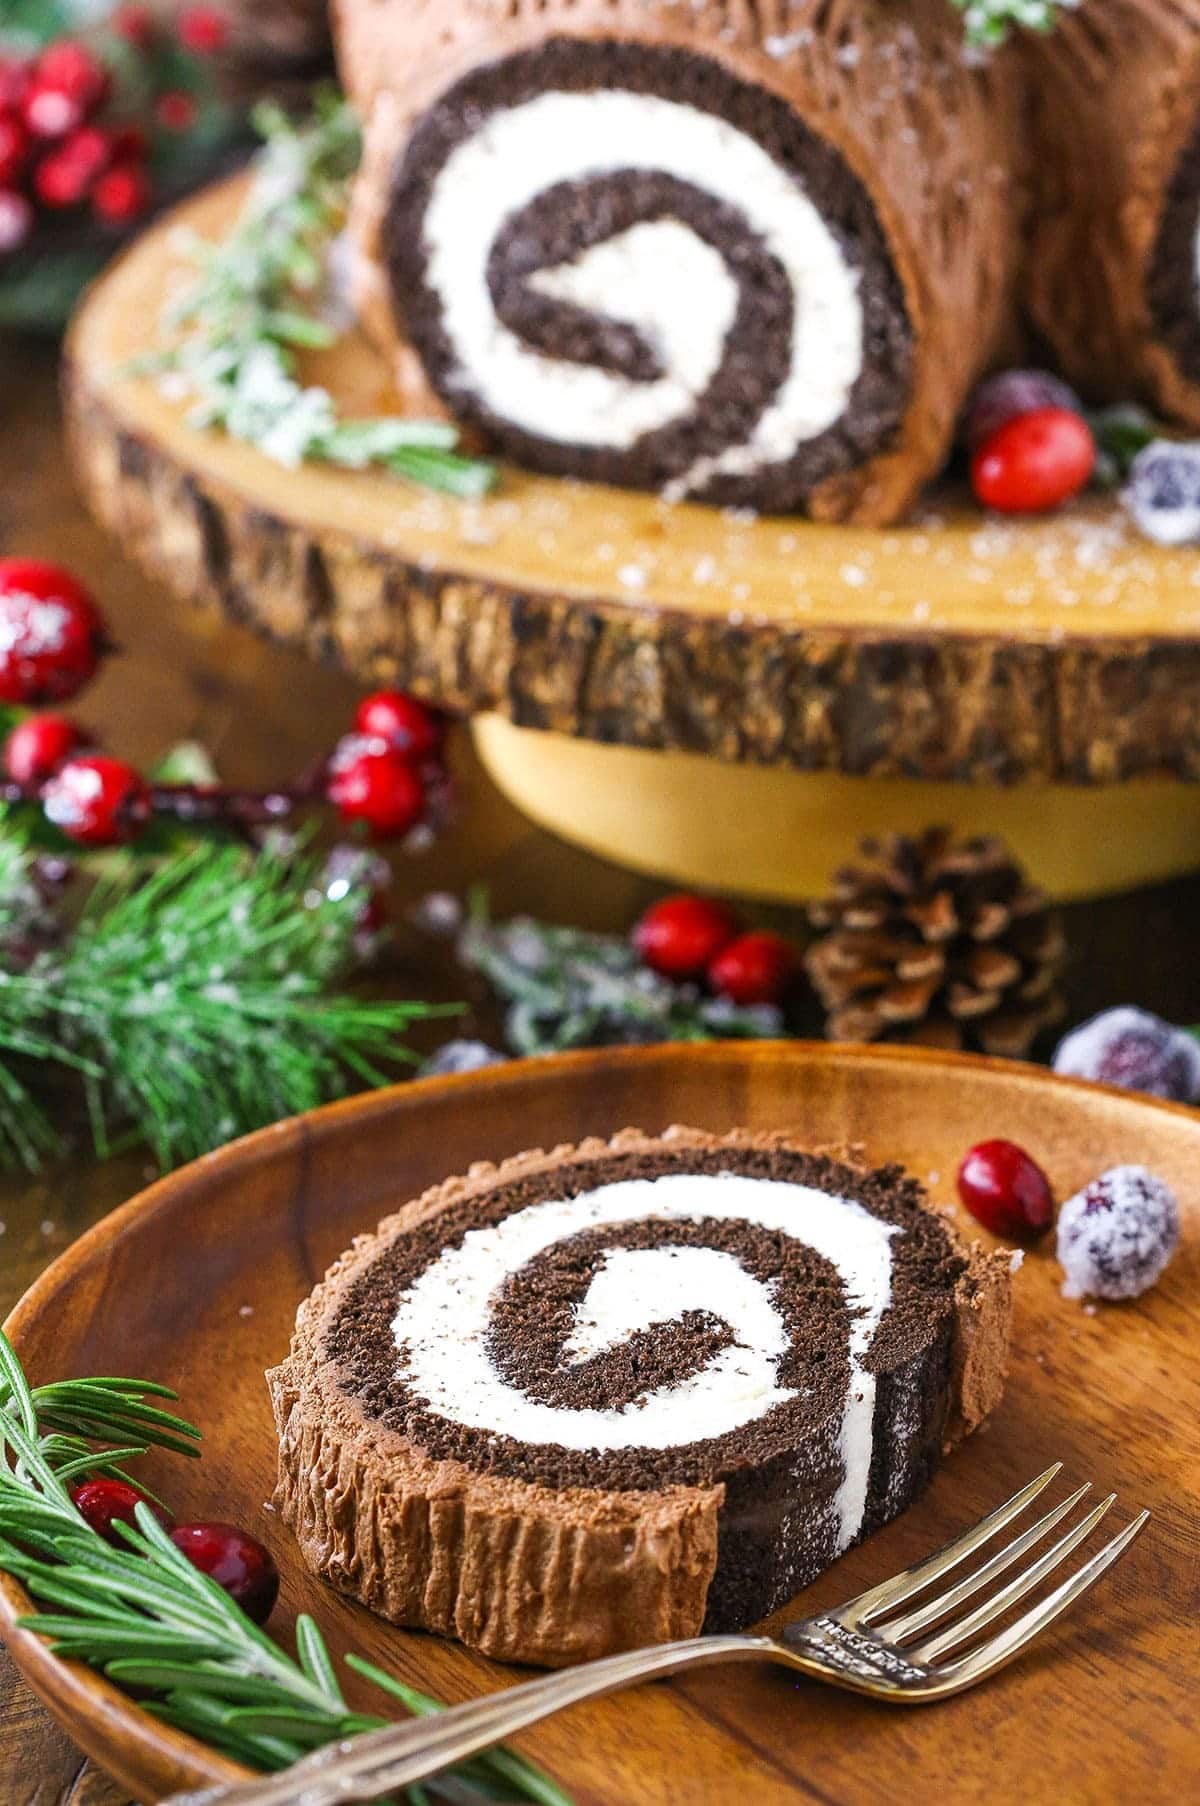 A slice of chocolate cake roll layered with cream and frosting served on a holiday table.